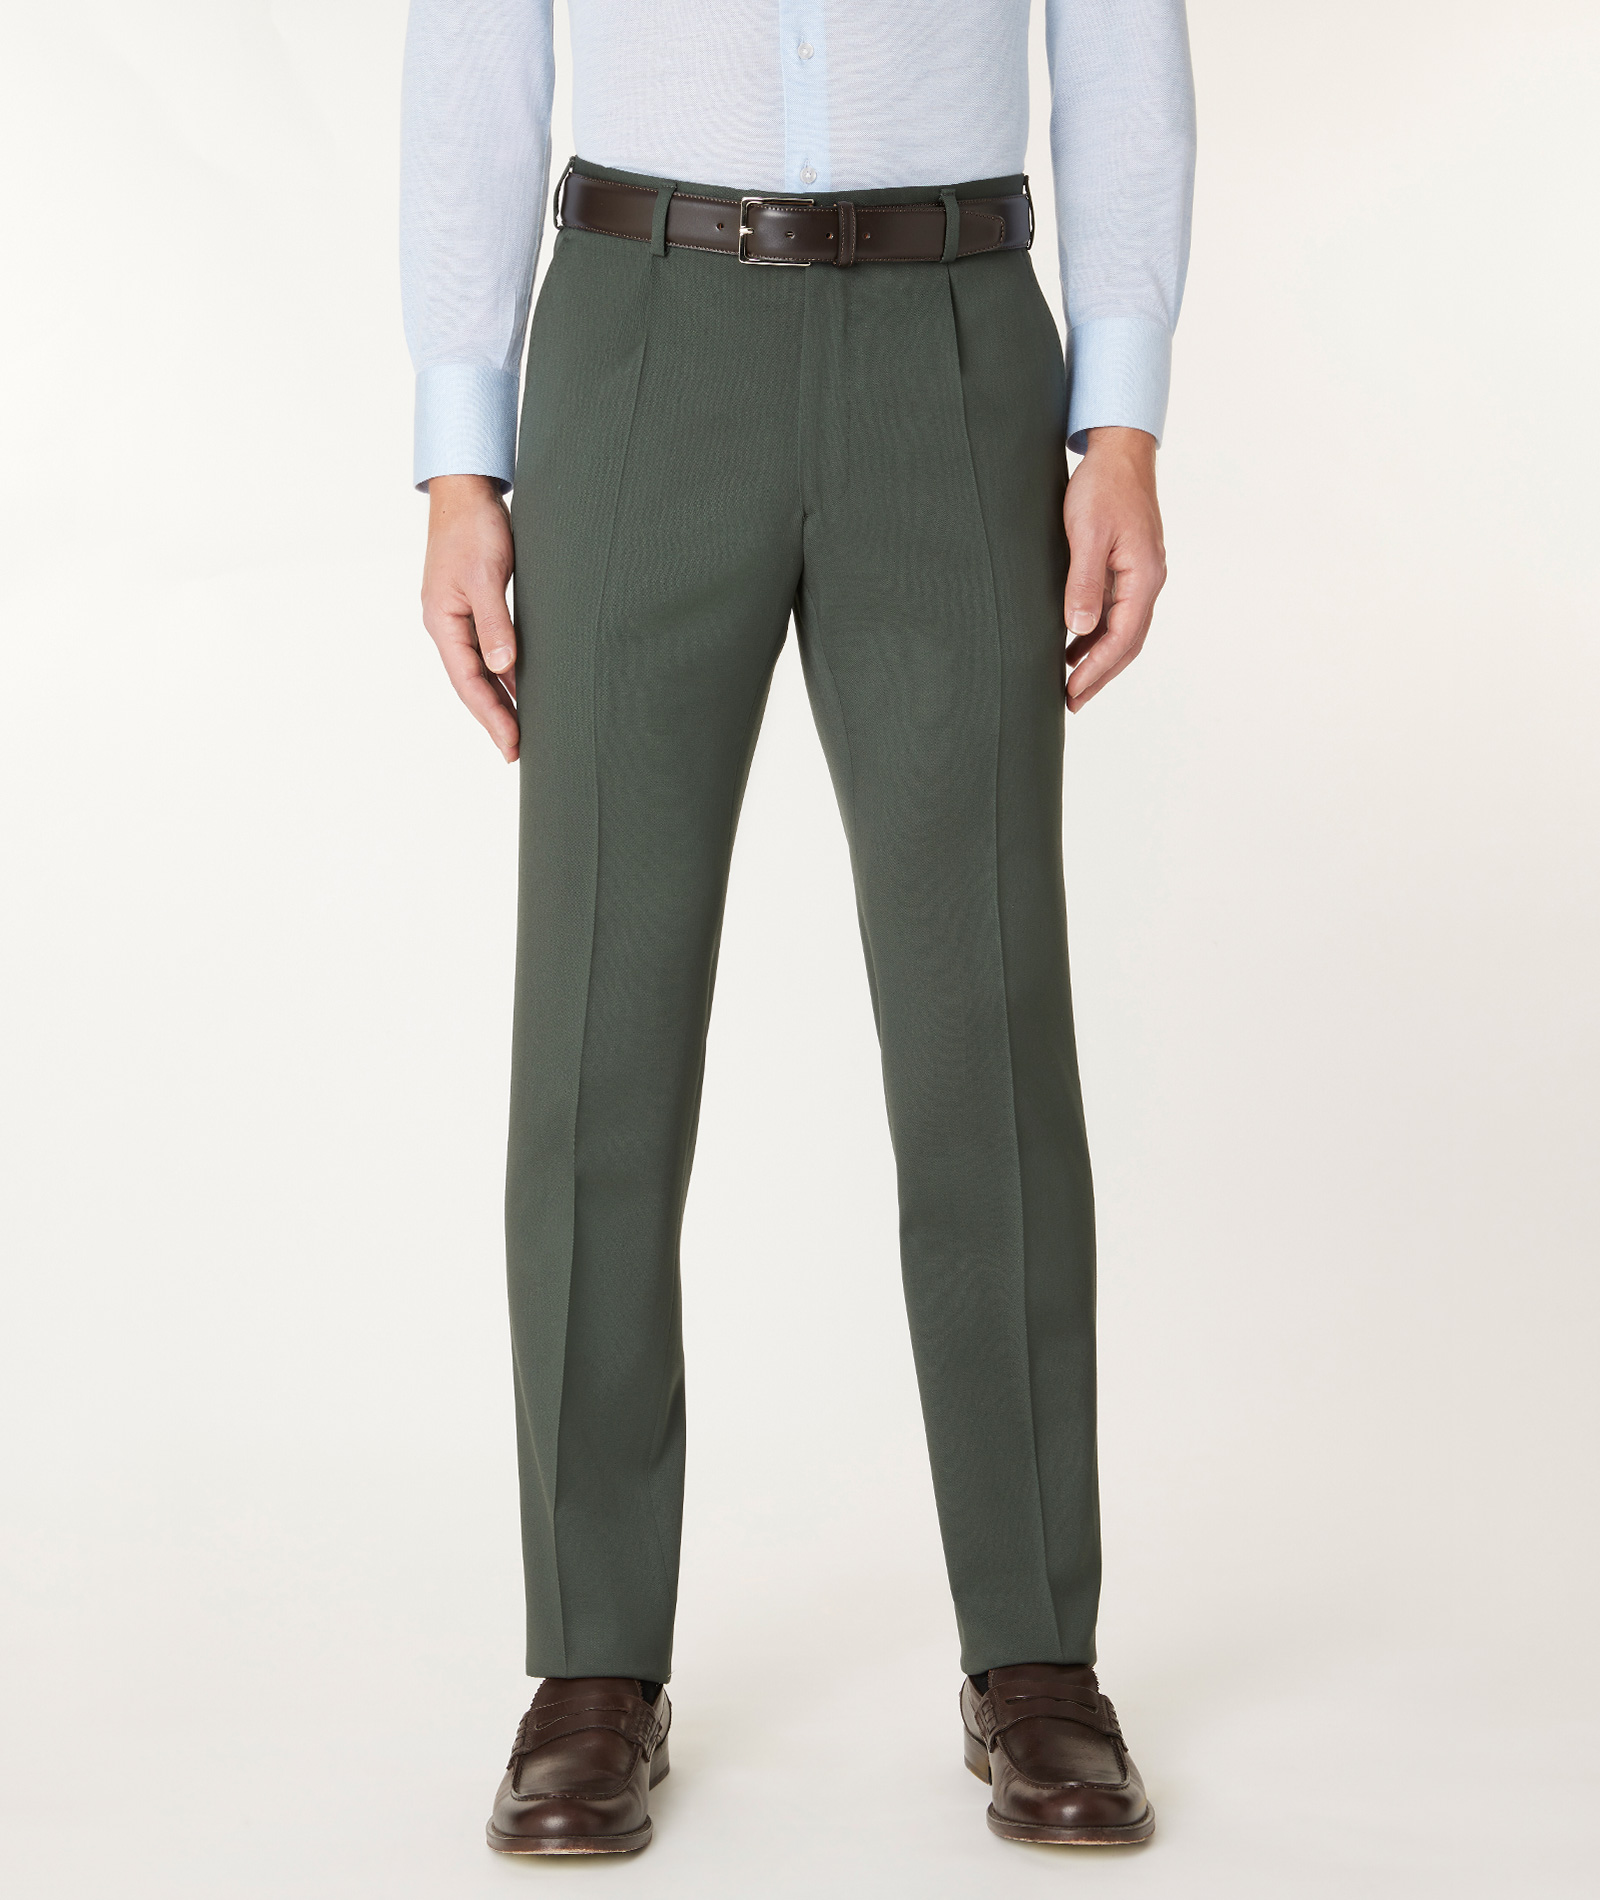 Twill Olive Green Stretch Merino Wool Men's Chinos, Made to Measure ...